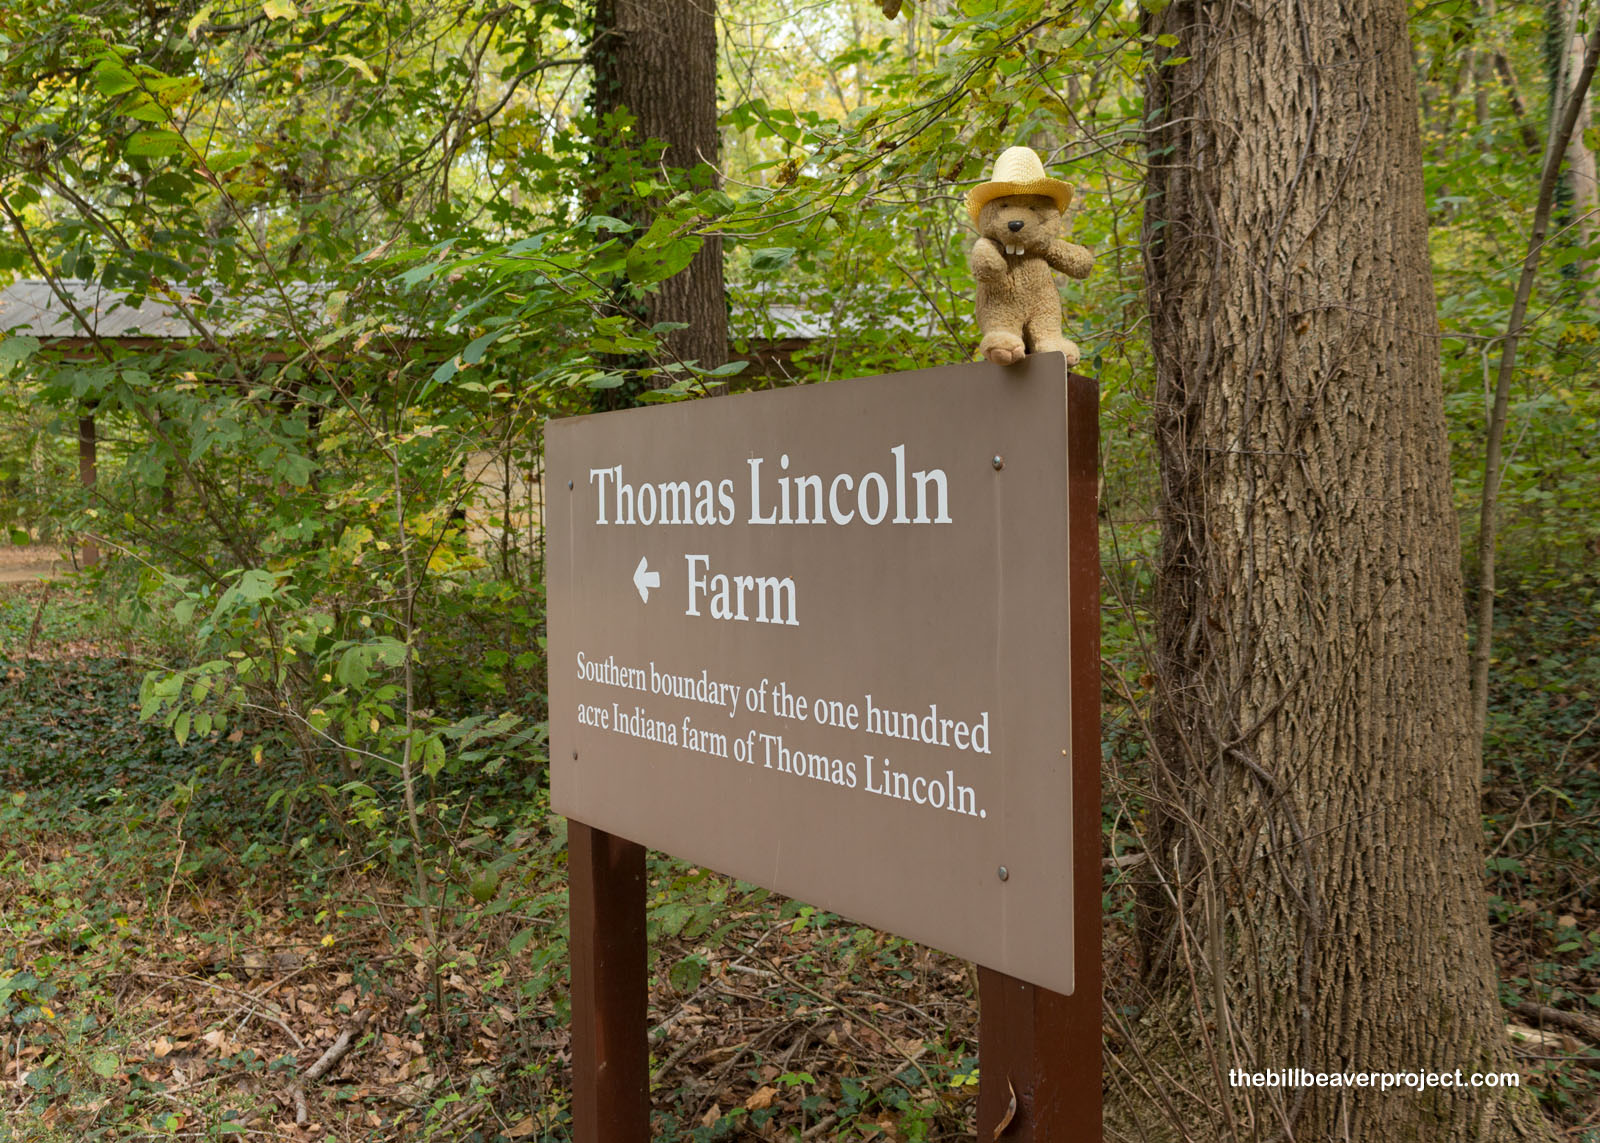 Thomas Lincoln's farm has been reconstructed and brought back to life!